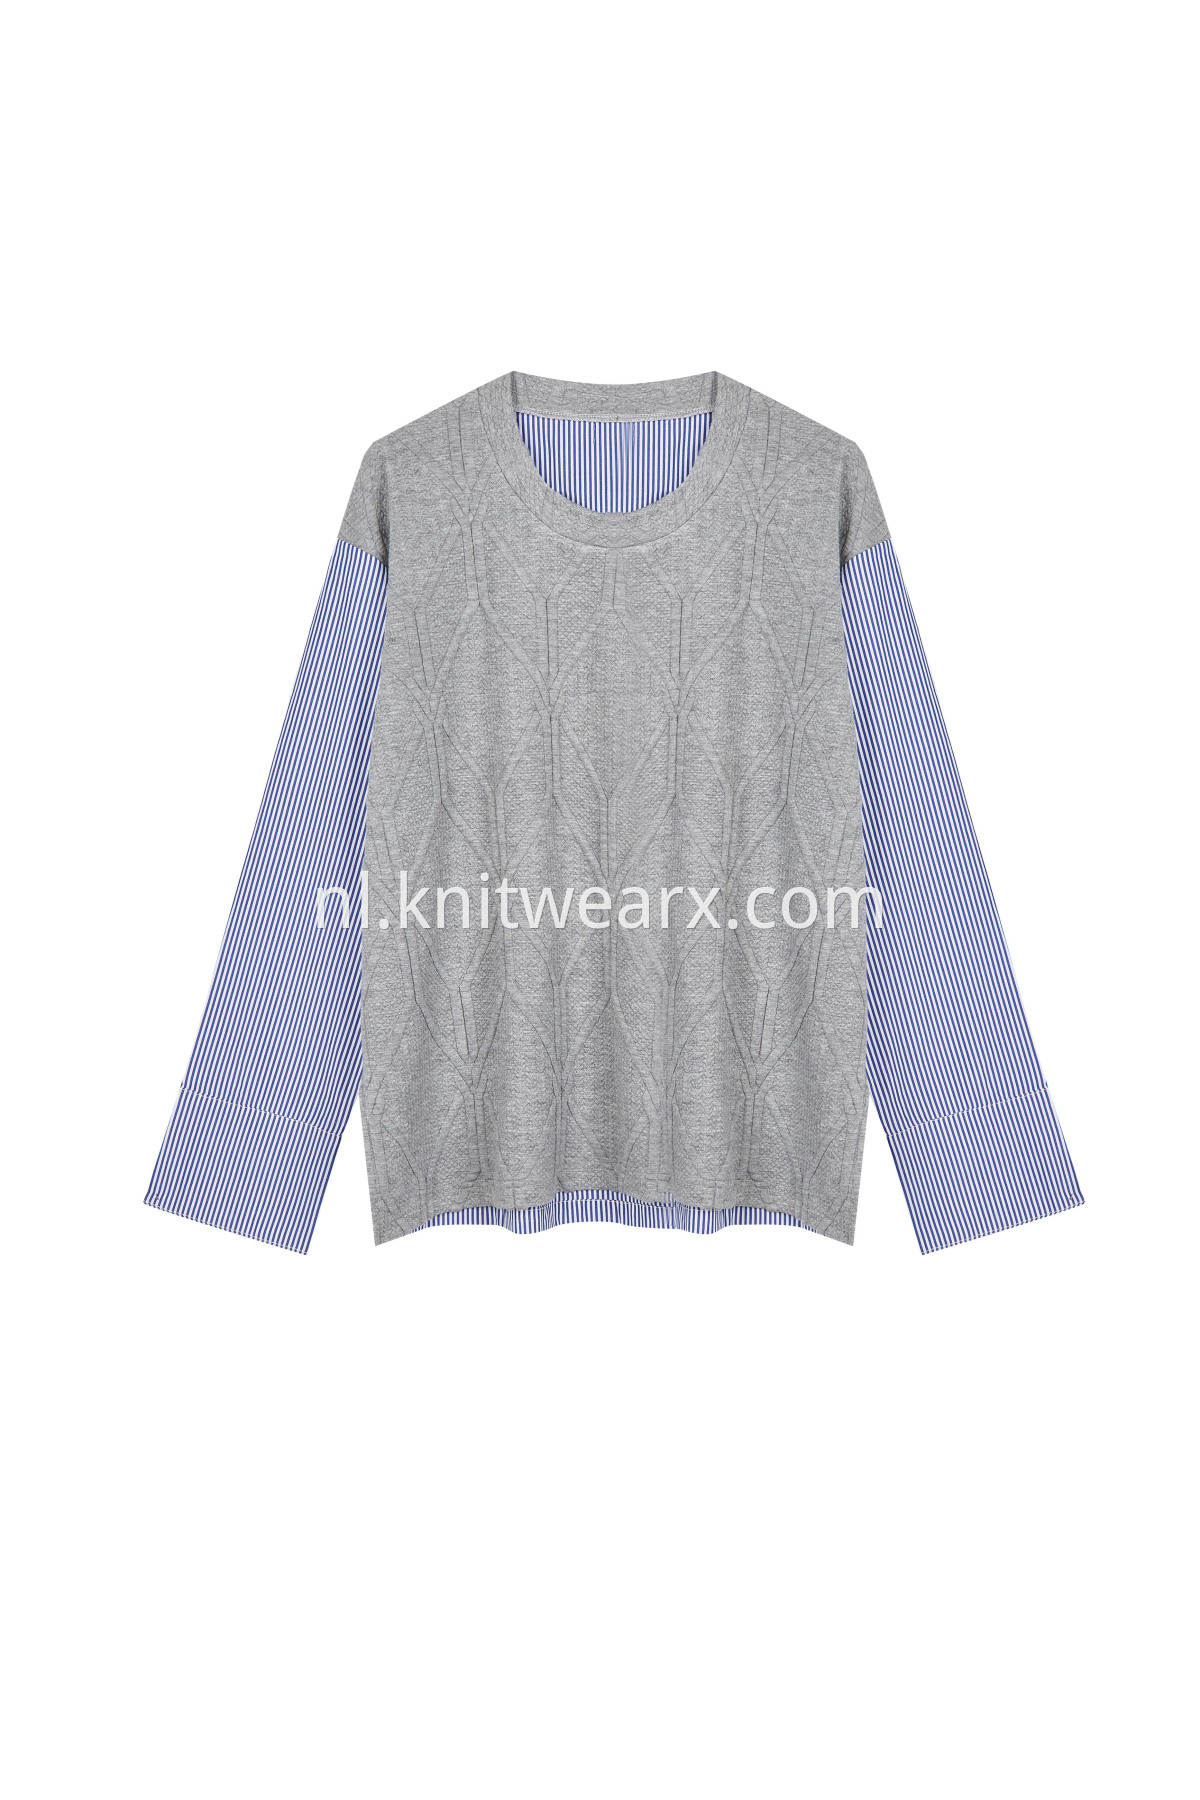 Women's Cotton Knit Fabric Casual Pullover Top